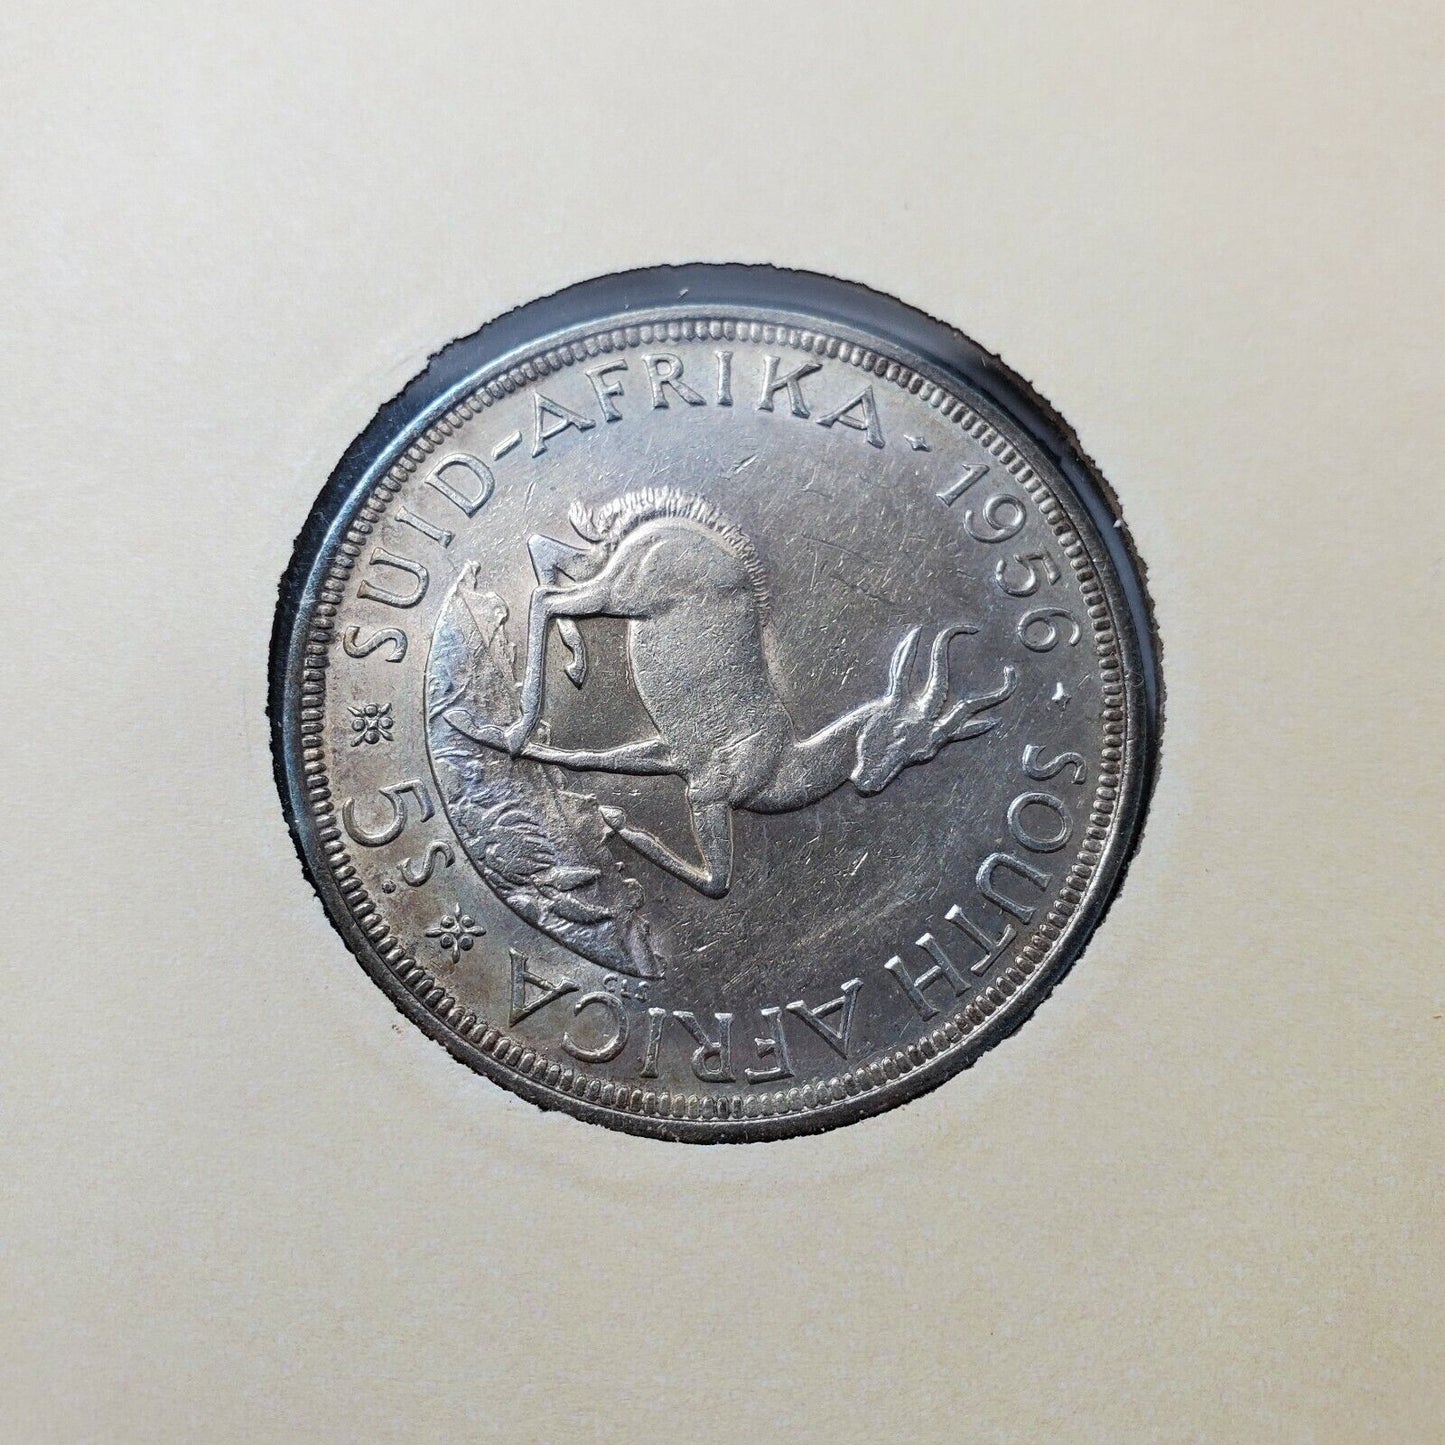 1956 South Africa 5 Shilling American Historical Society Silver Dollars of World